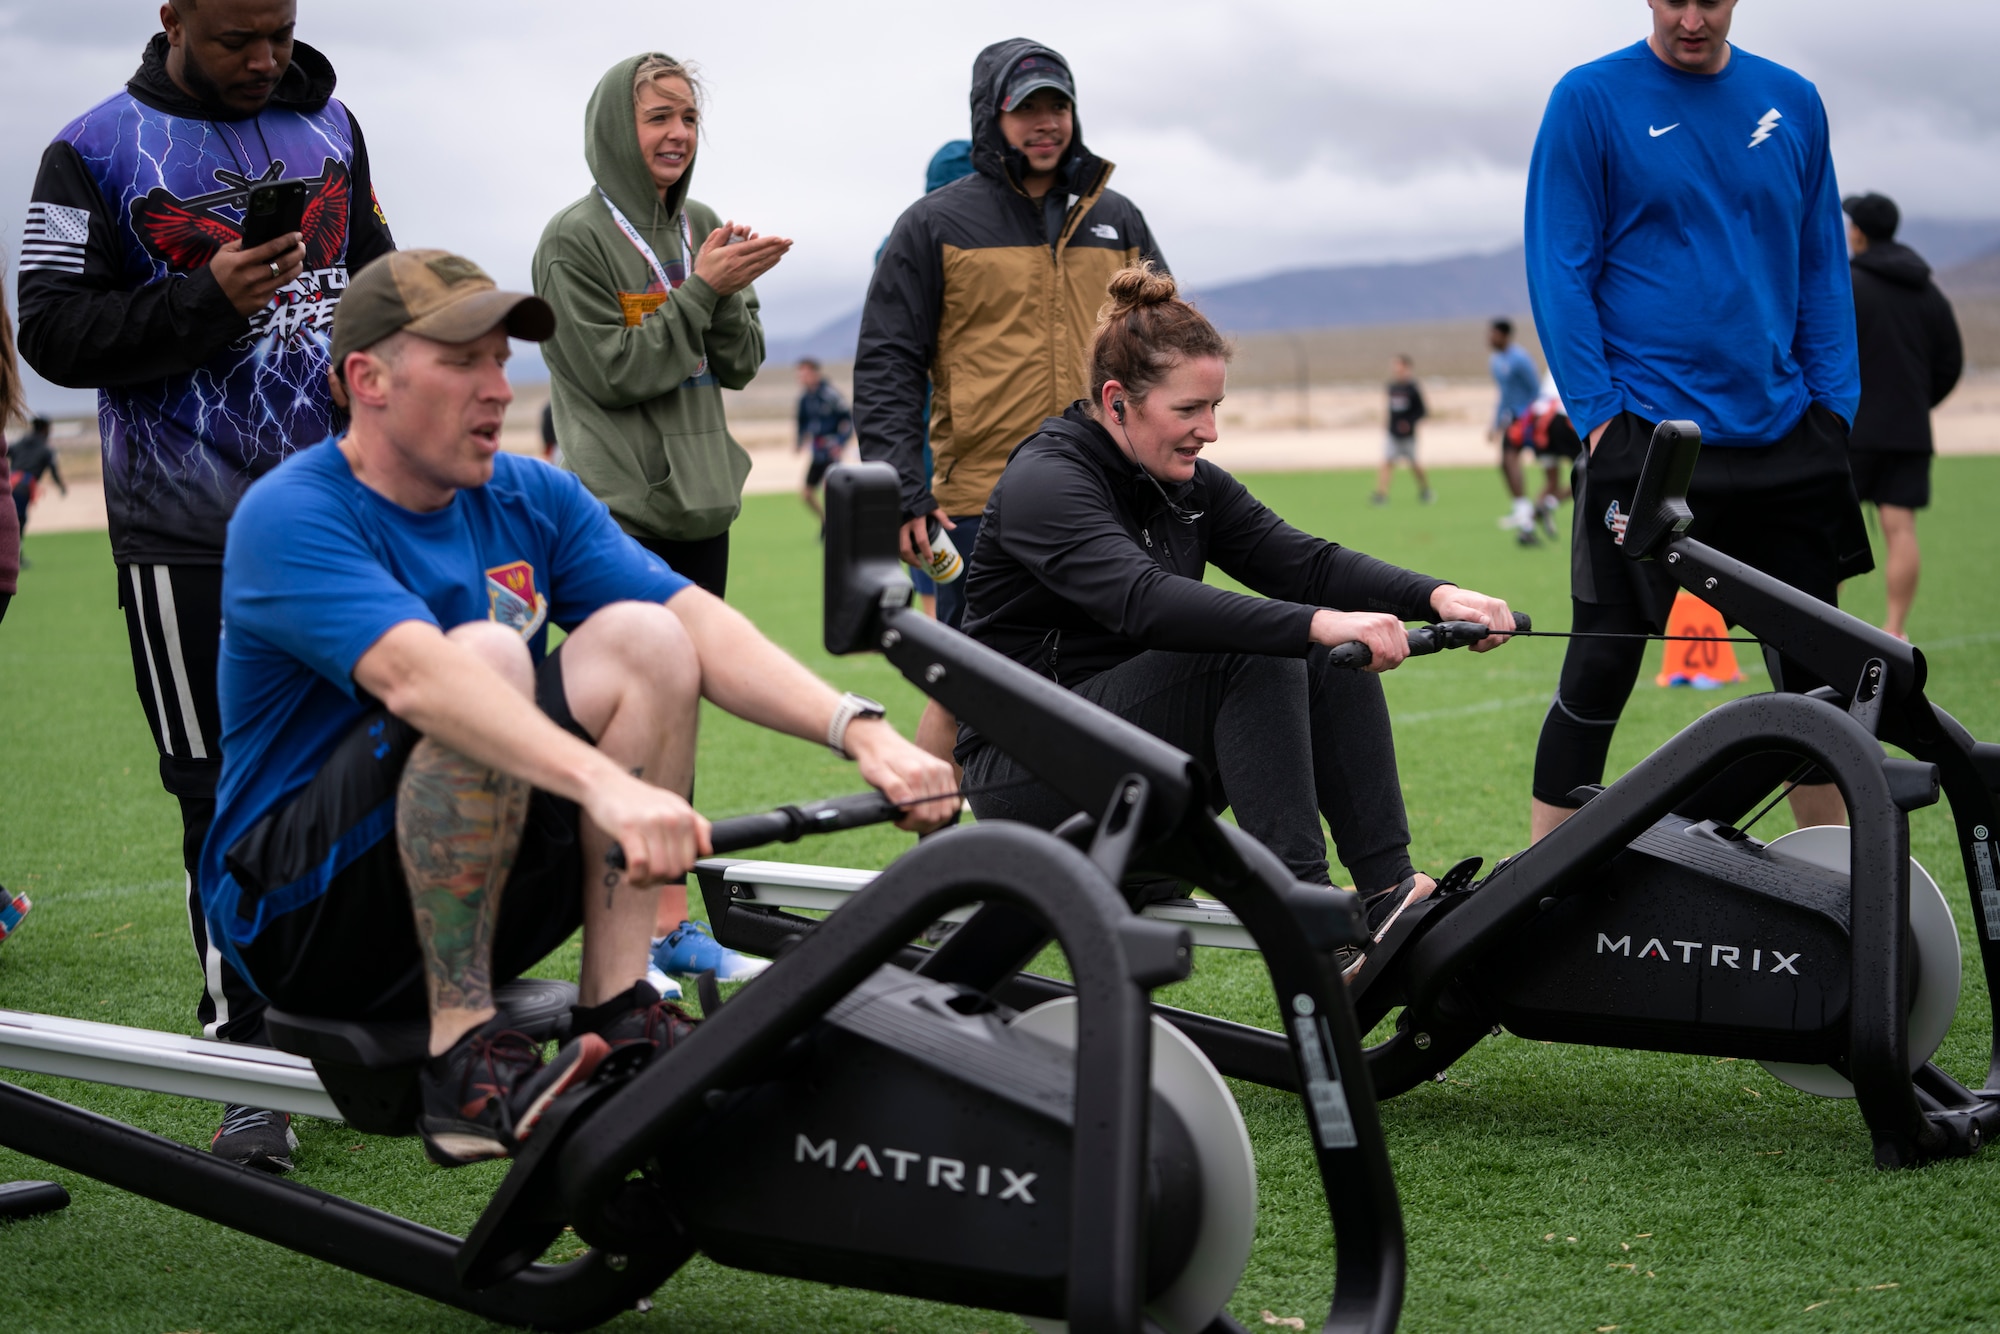 Airmen gather around two people racing on rowing machines.